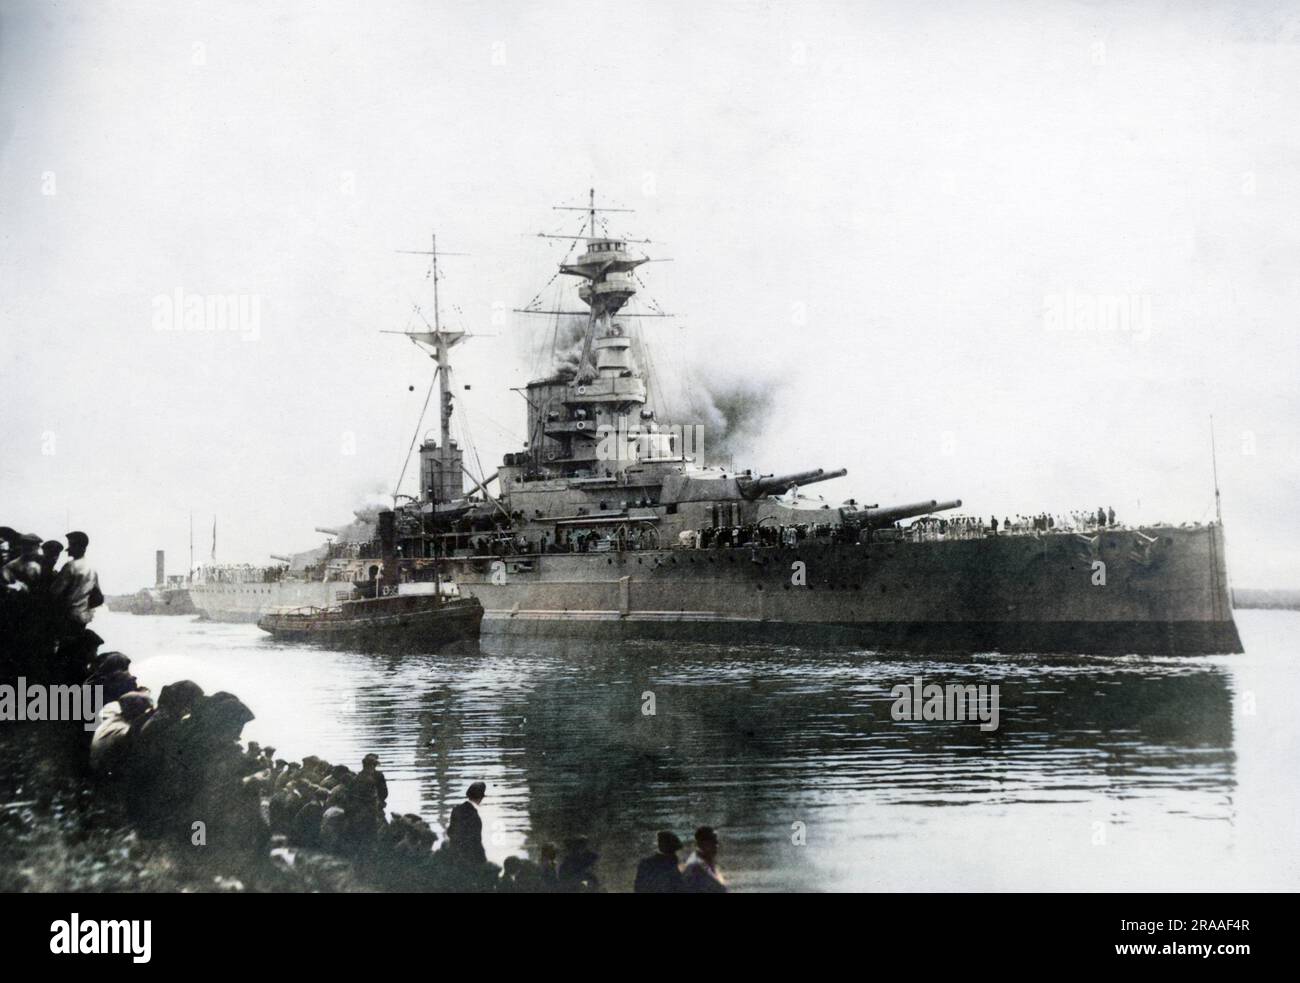 HMS Royal Sovereign, British Revenge class battleship, launched 1915, served in the First World War and part of the Second World War. Seen here with a tug alongside, and people watching from the land.     Date: 20th century Stock Photo